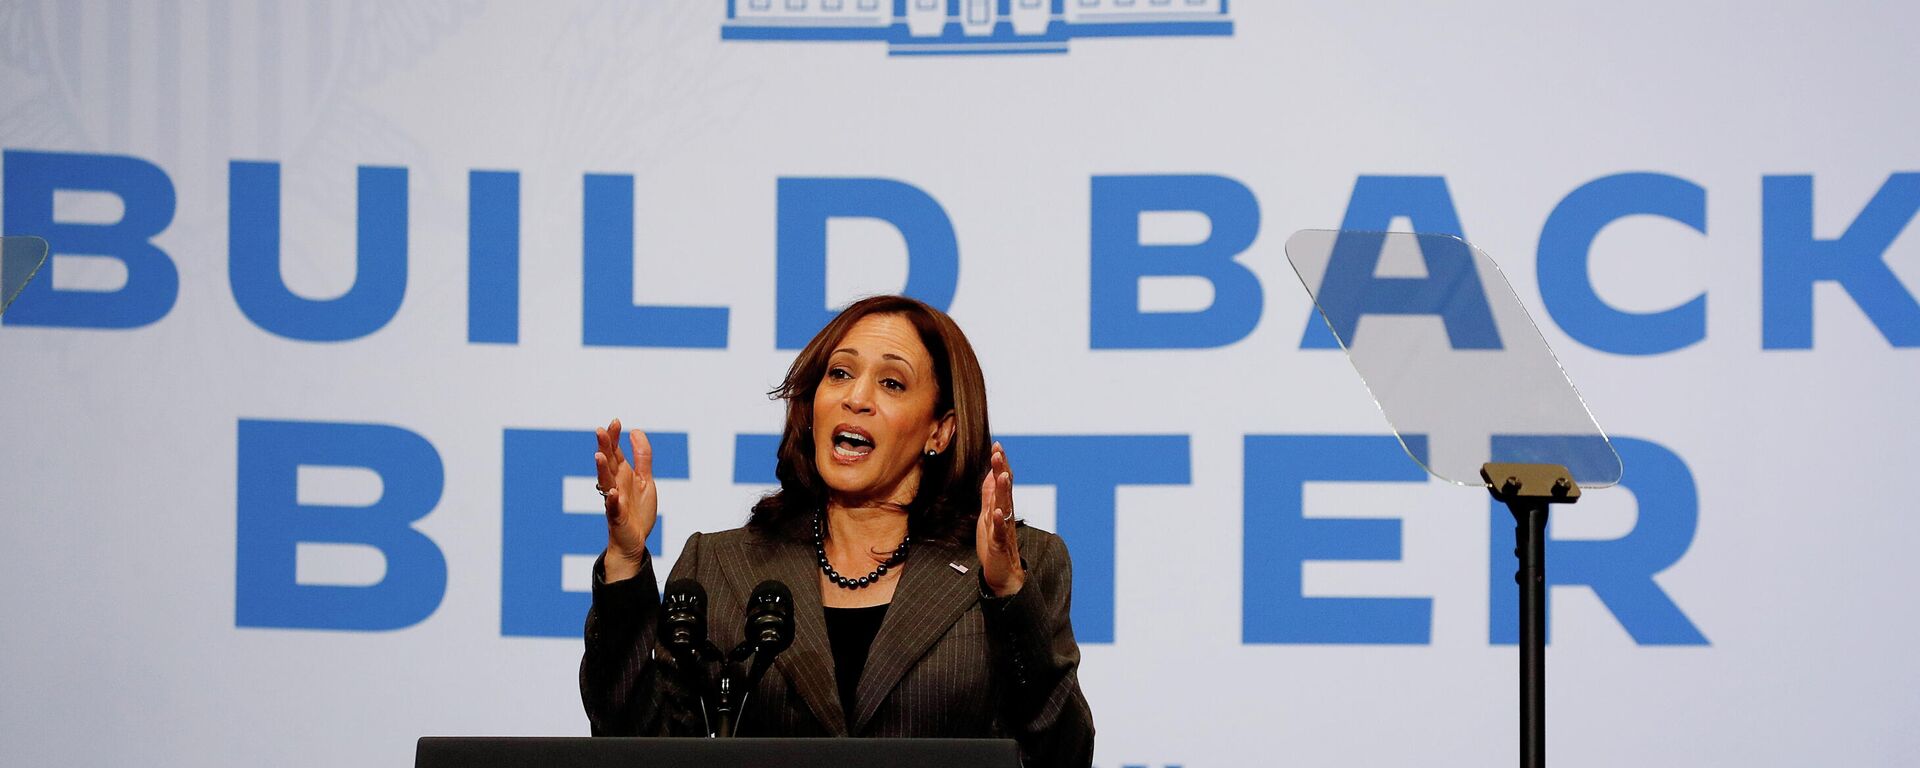 U.S. Vice President Kamala Harris delivers remarks promoting the Biden administration's infrastructure plans during a visit to the Northeast Bronx YMCA in the Bronx borough of New York City, New York, U.S., October 22, 2021. - Sputnik International, 1920, 22.10.2021